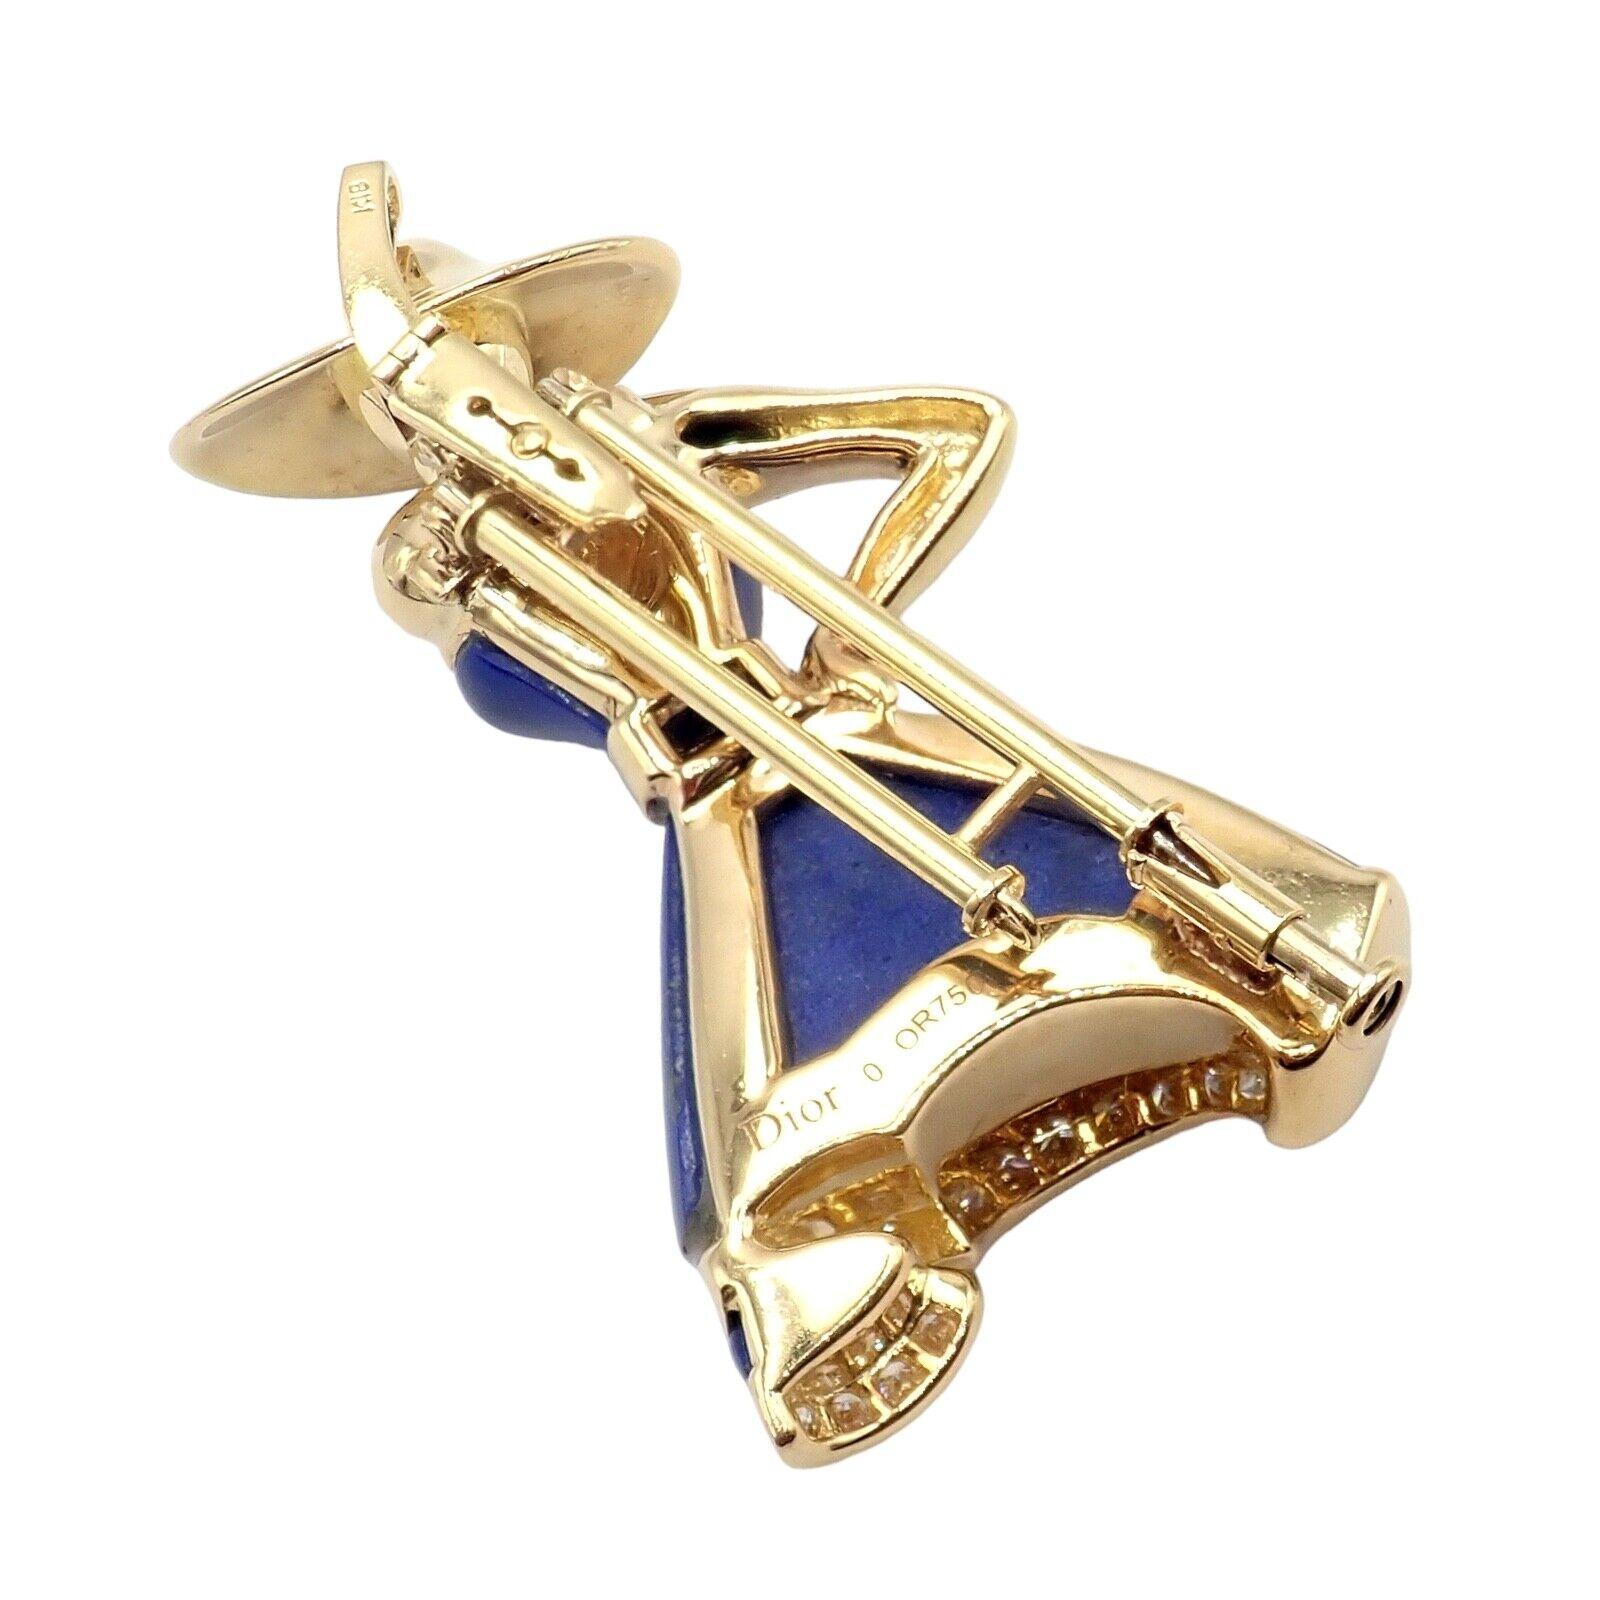 The Authentic! Christian Dior 18k Yellow Gold Diamond Lapis Lady Dior Brooch / Pendant is a truly exceptional piece of jewelry. Crafted from 18k yellow gold, it radiates luxury and elegance. The brooch features a captivating lapis lazuli